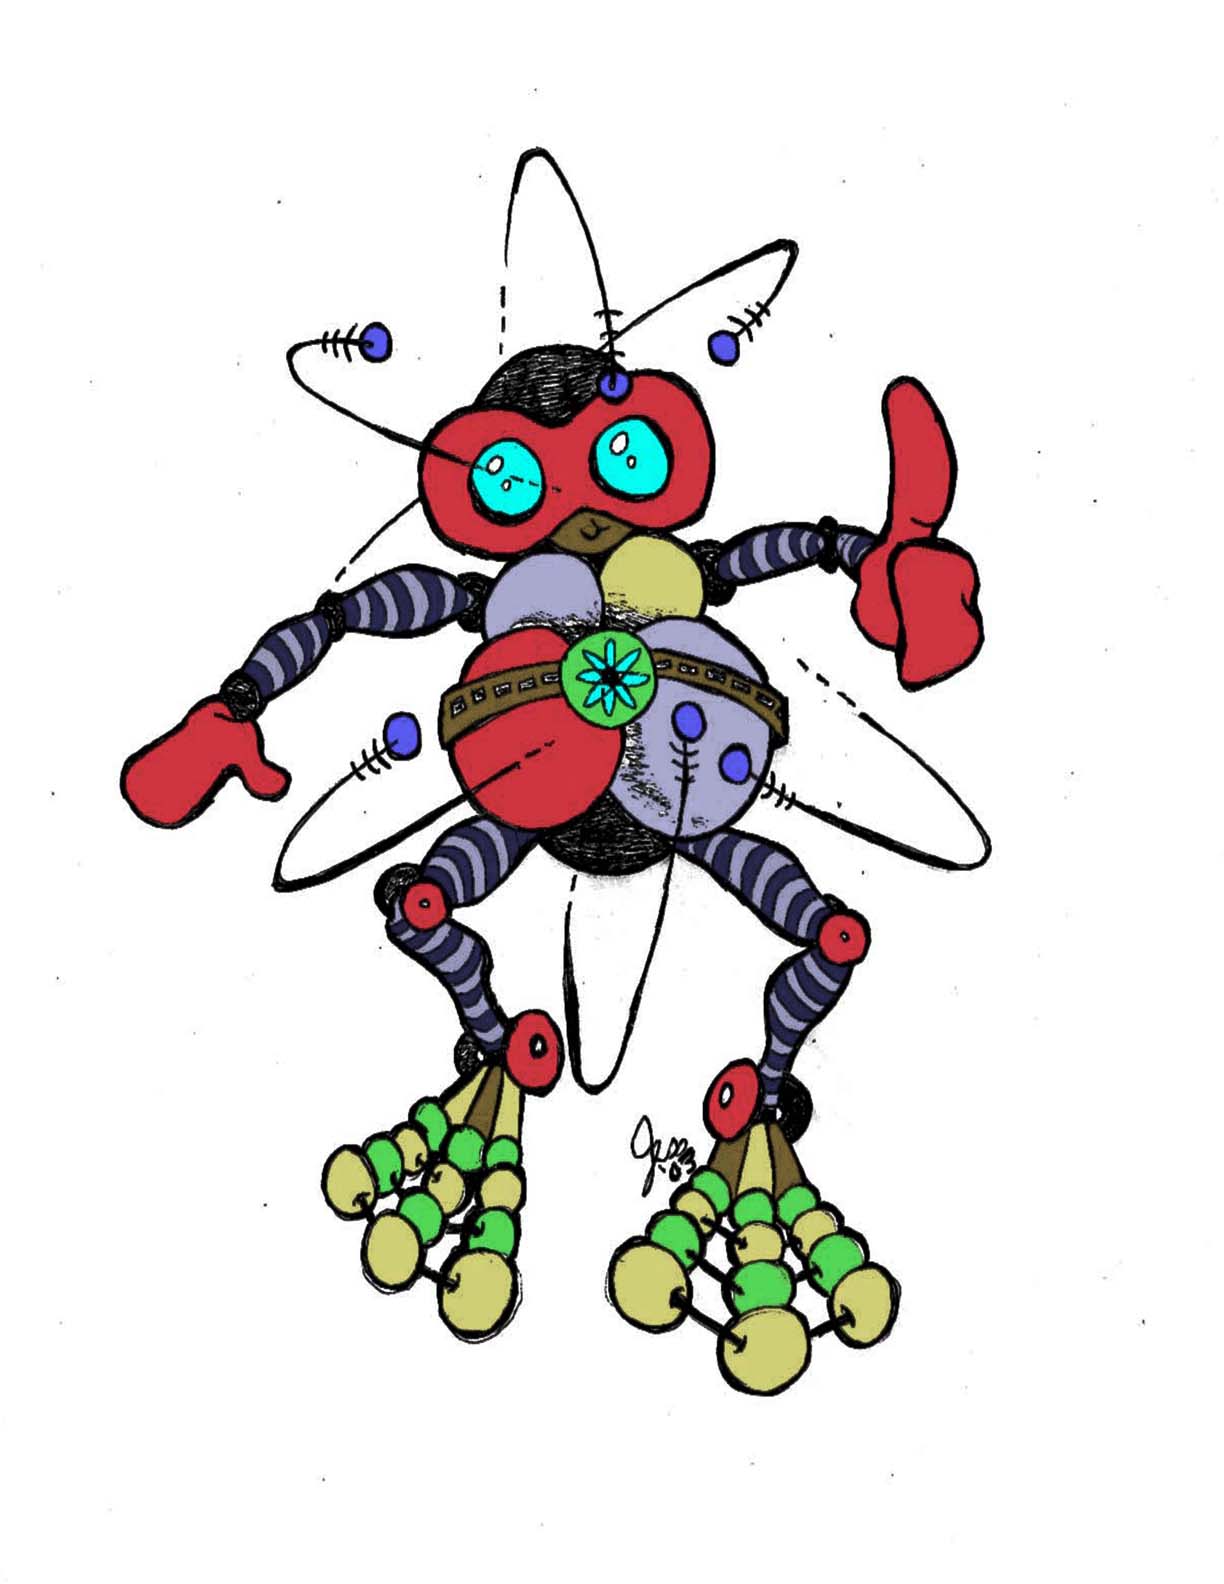 Cute Nanobot...  The culprit behind either mass transcendence of the human race...  Or a shit-load of gray goo engulfing the planet...